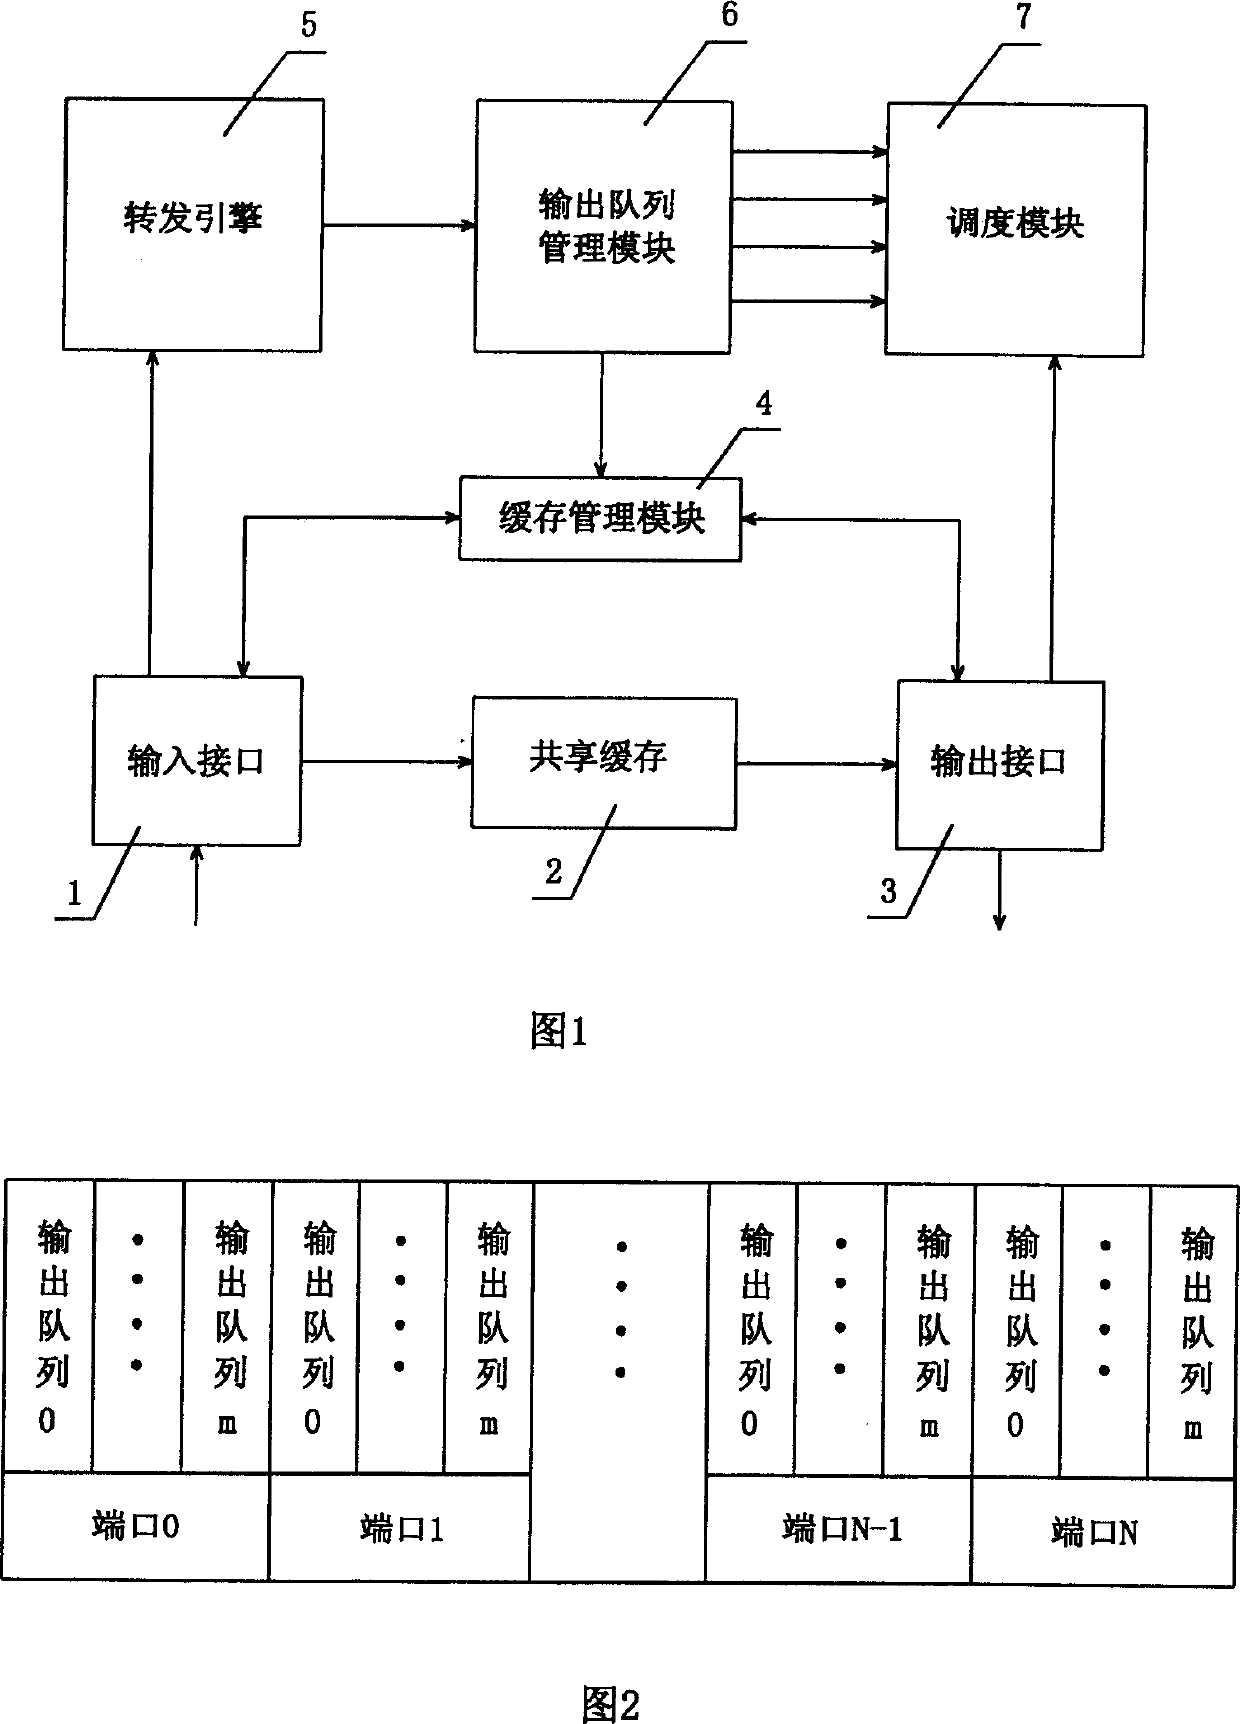 Ethernet exchange chip output queue management and dispatching method and device